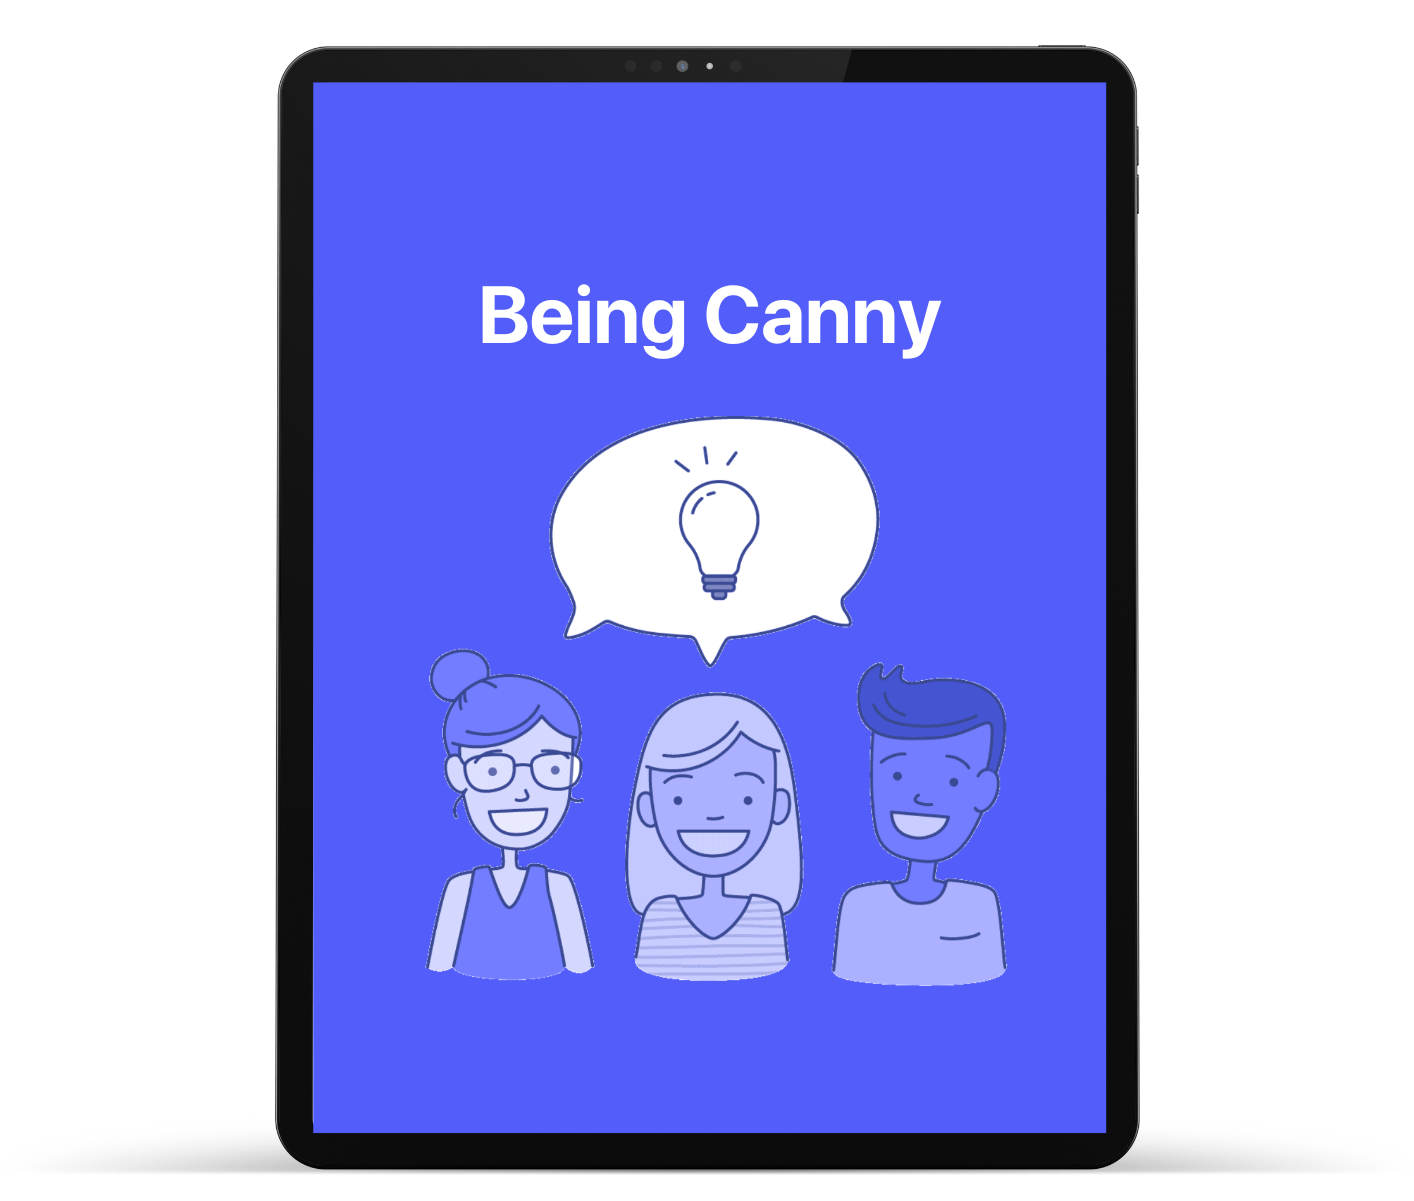 Being Canny ebook icon (7)-1